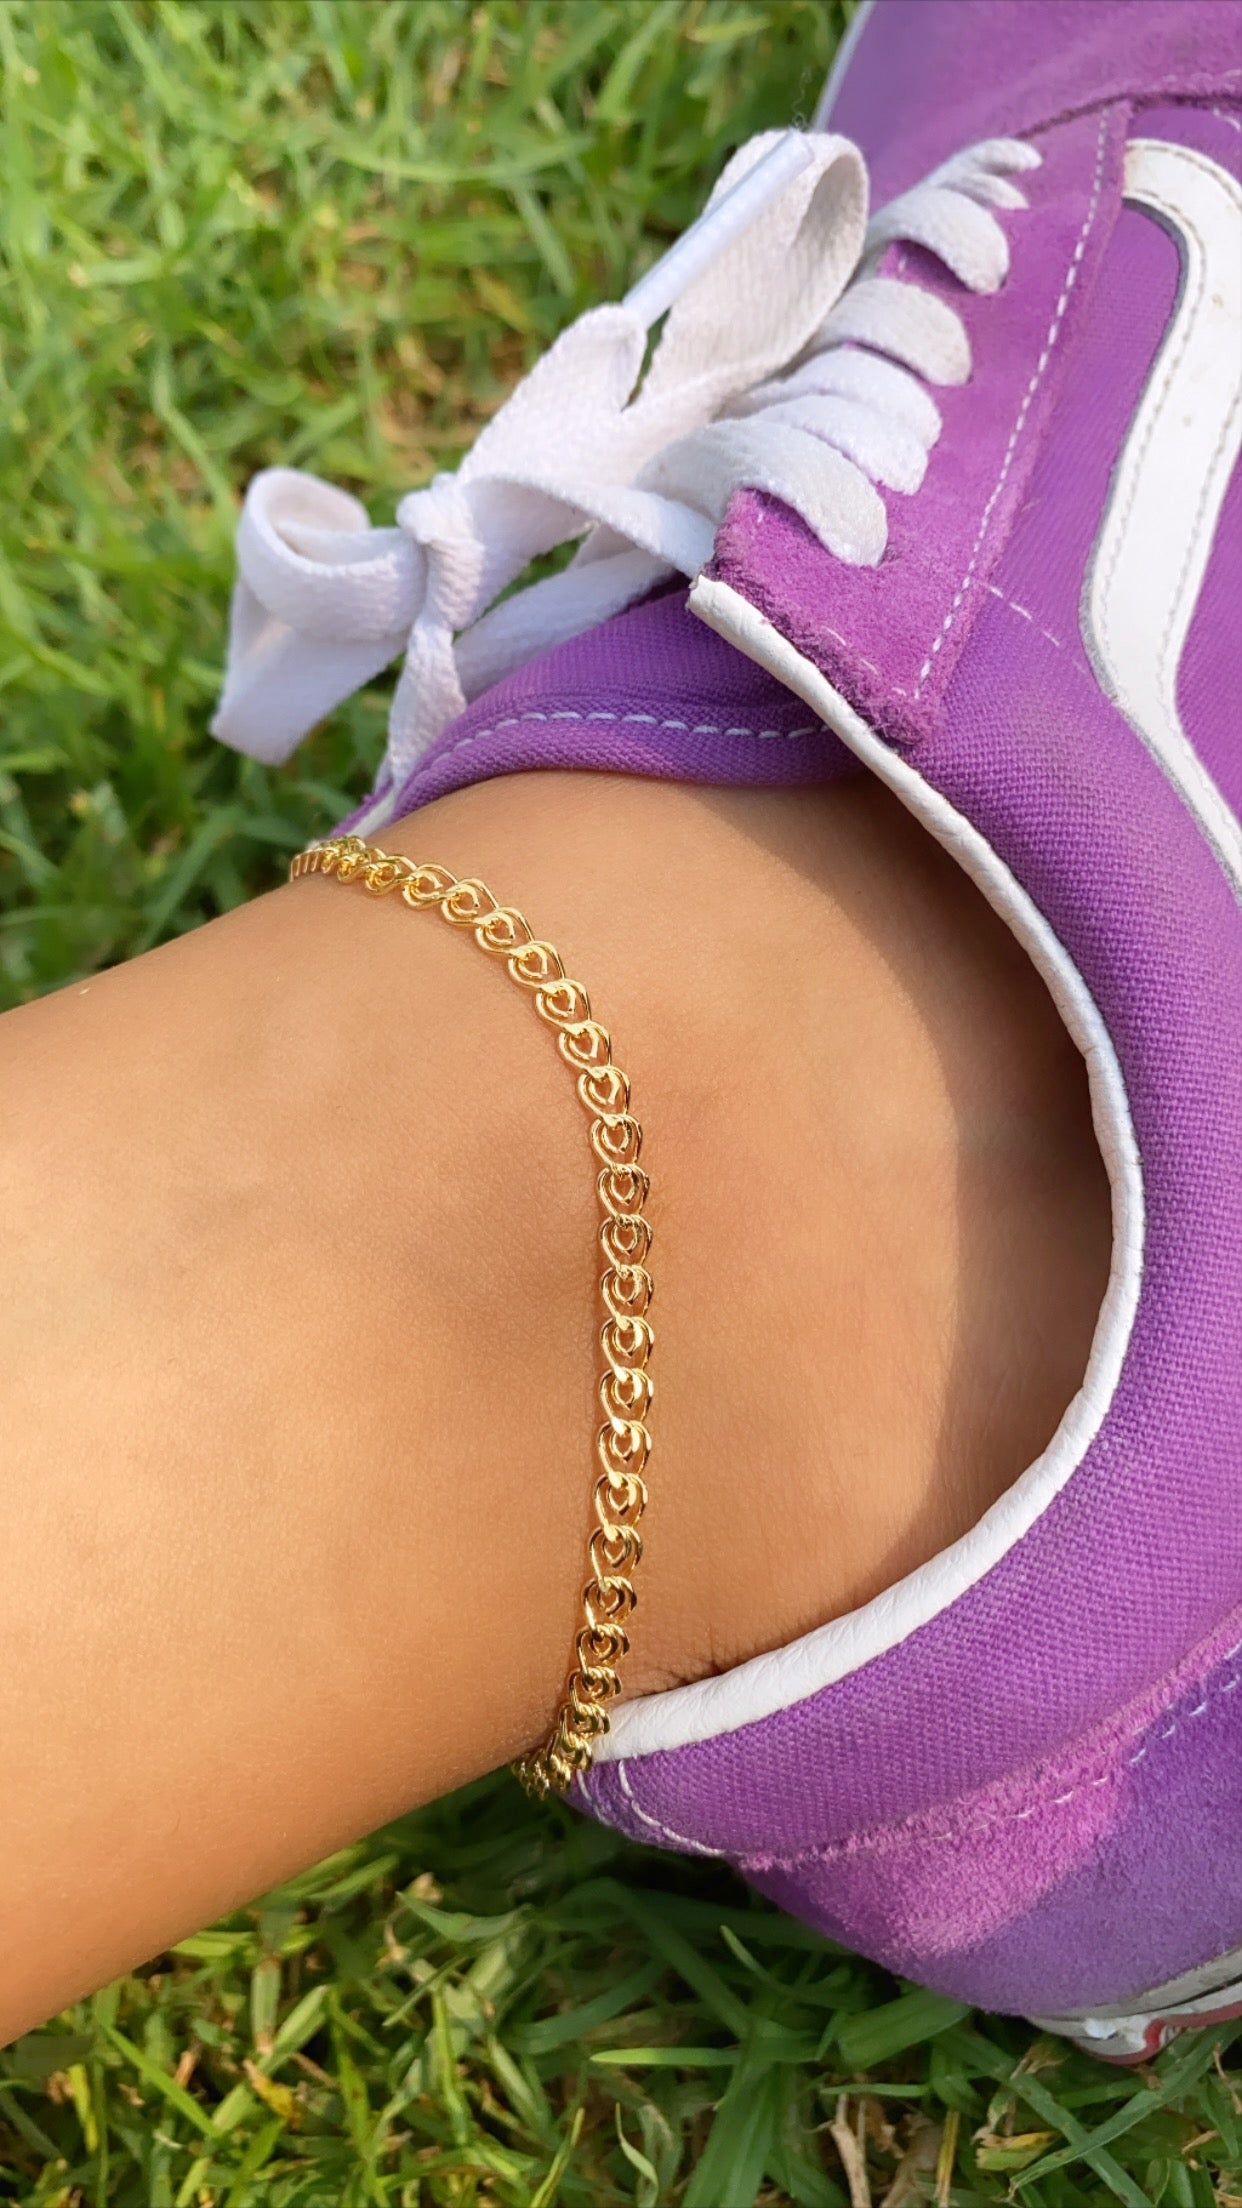 Mario anklet